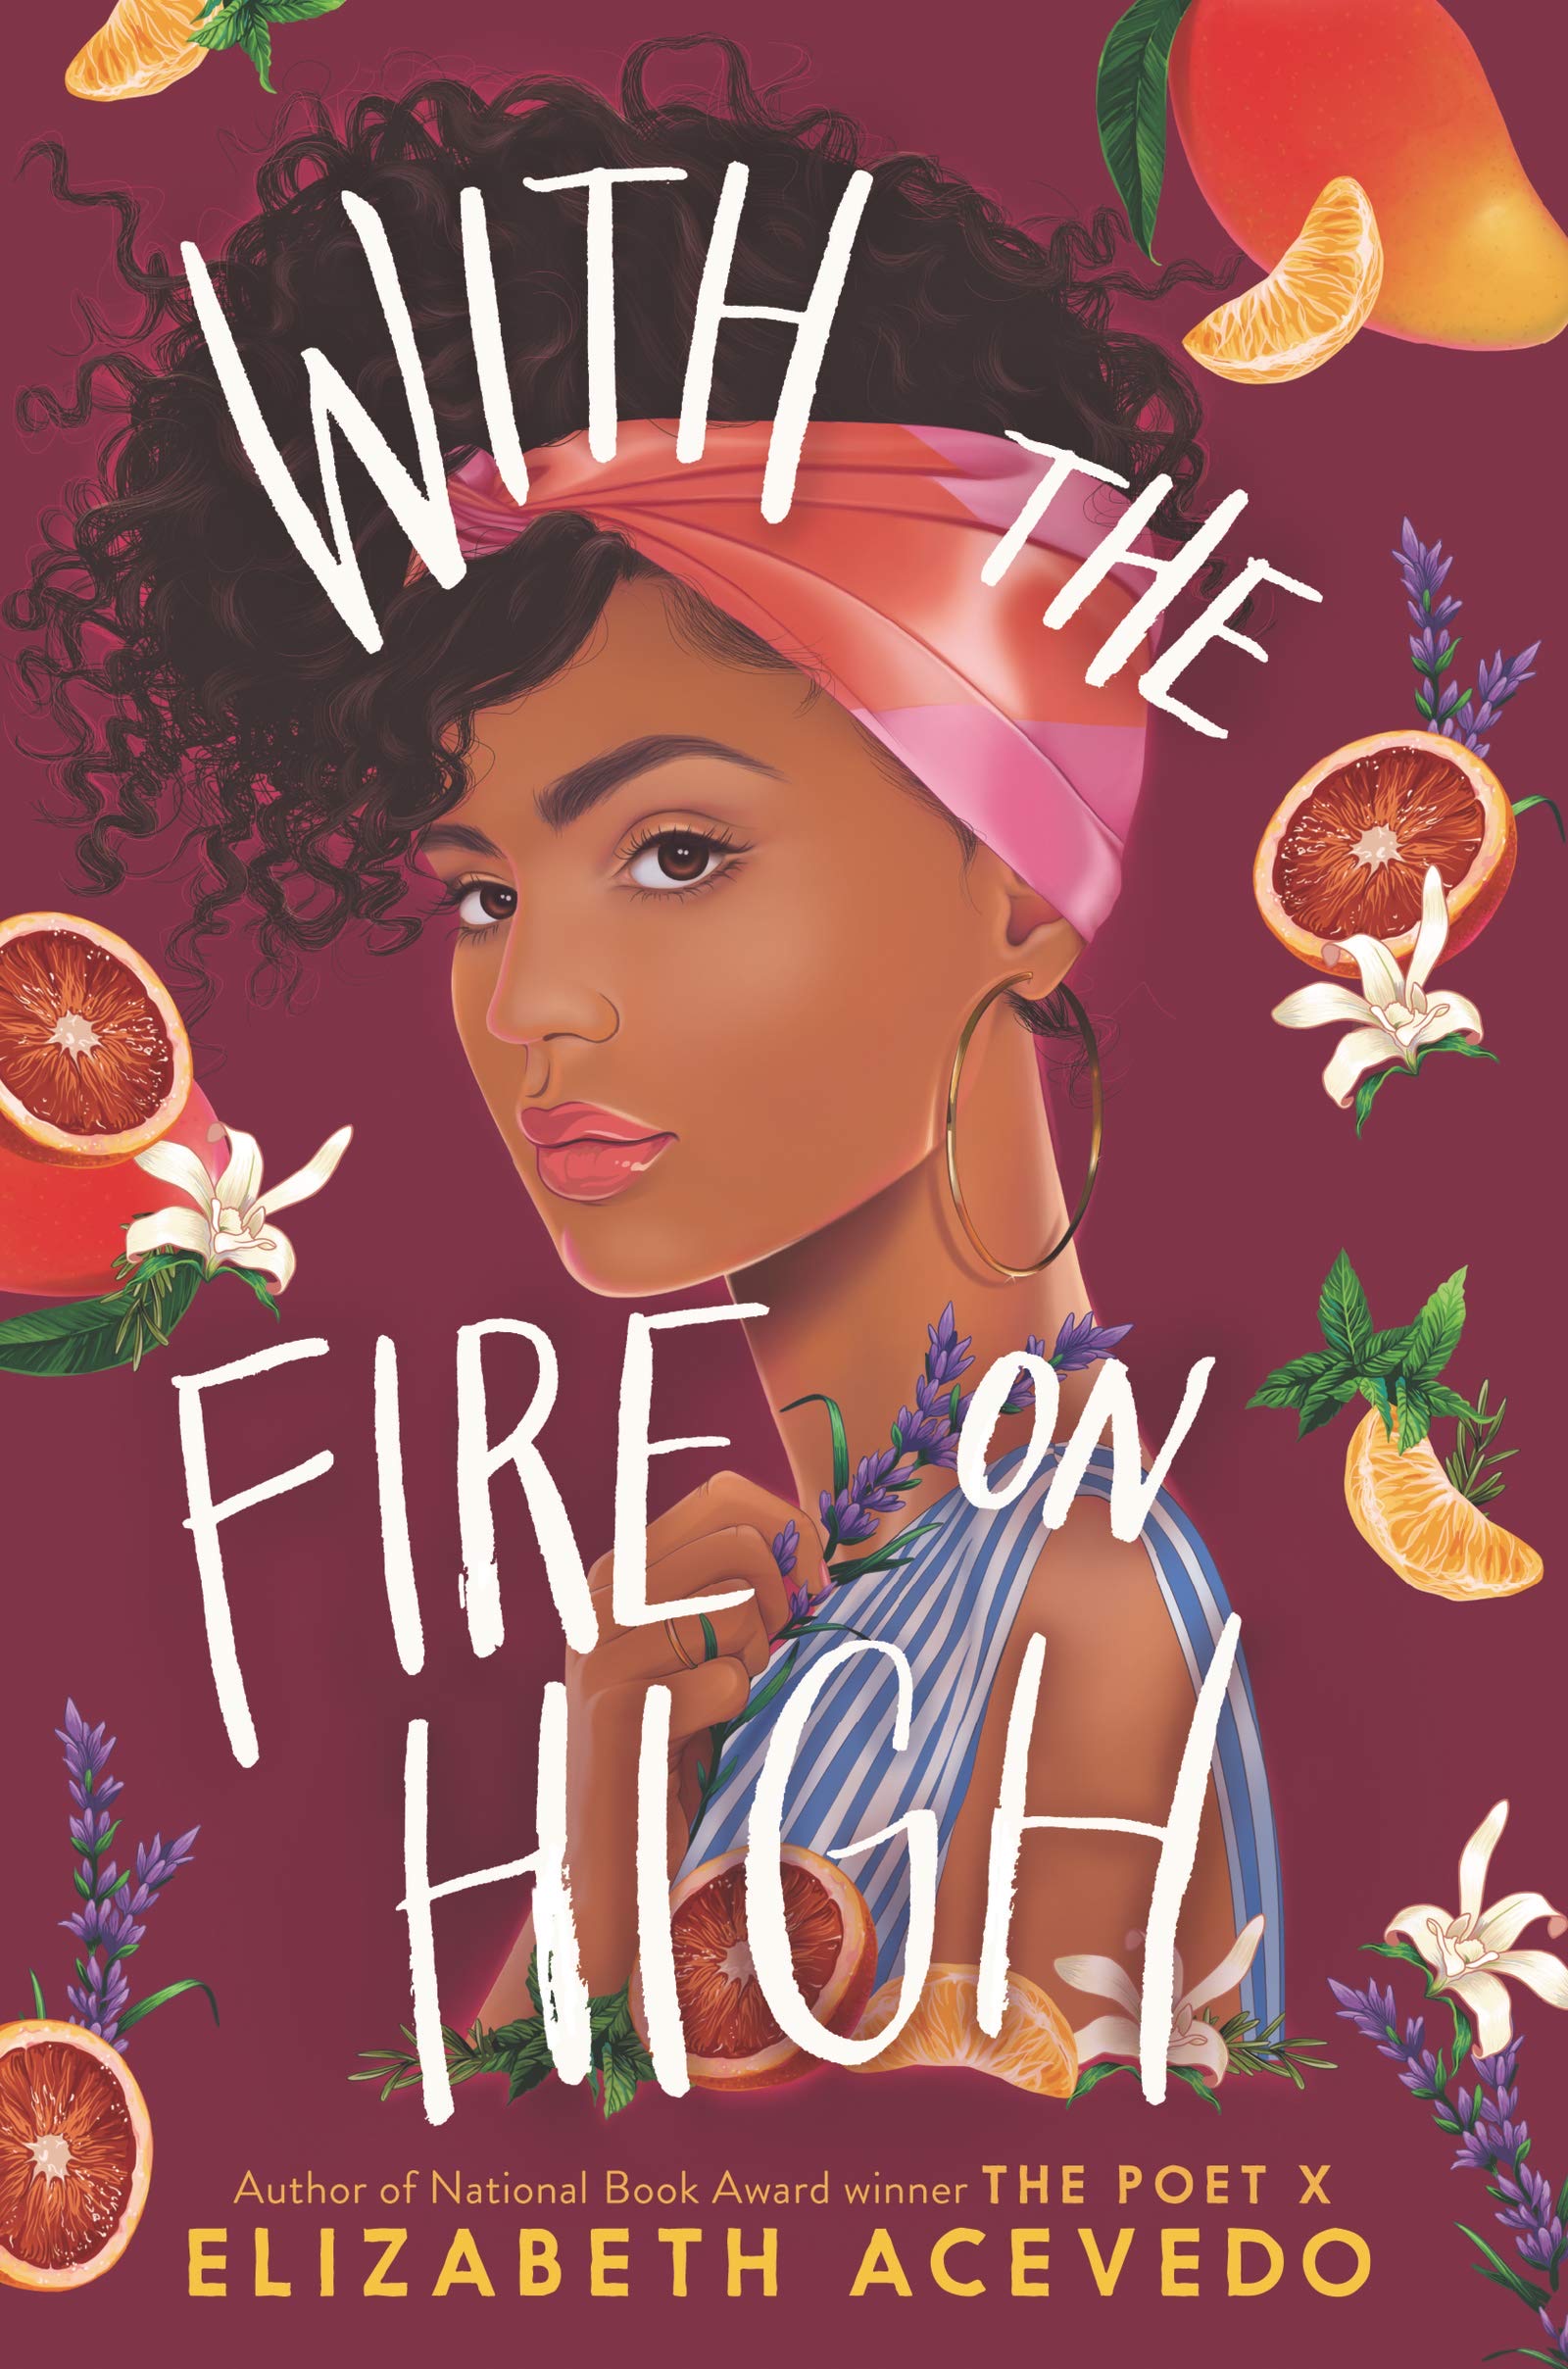 Books by Black authors to read this fall